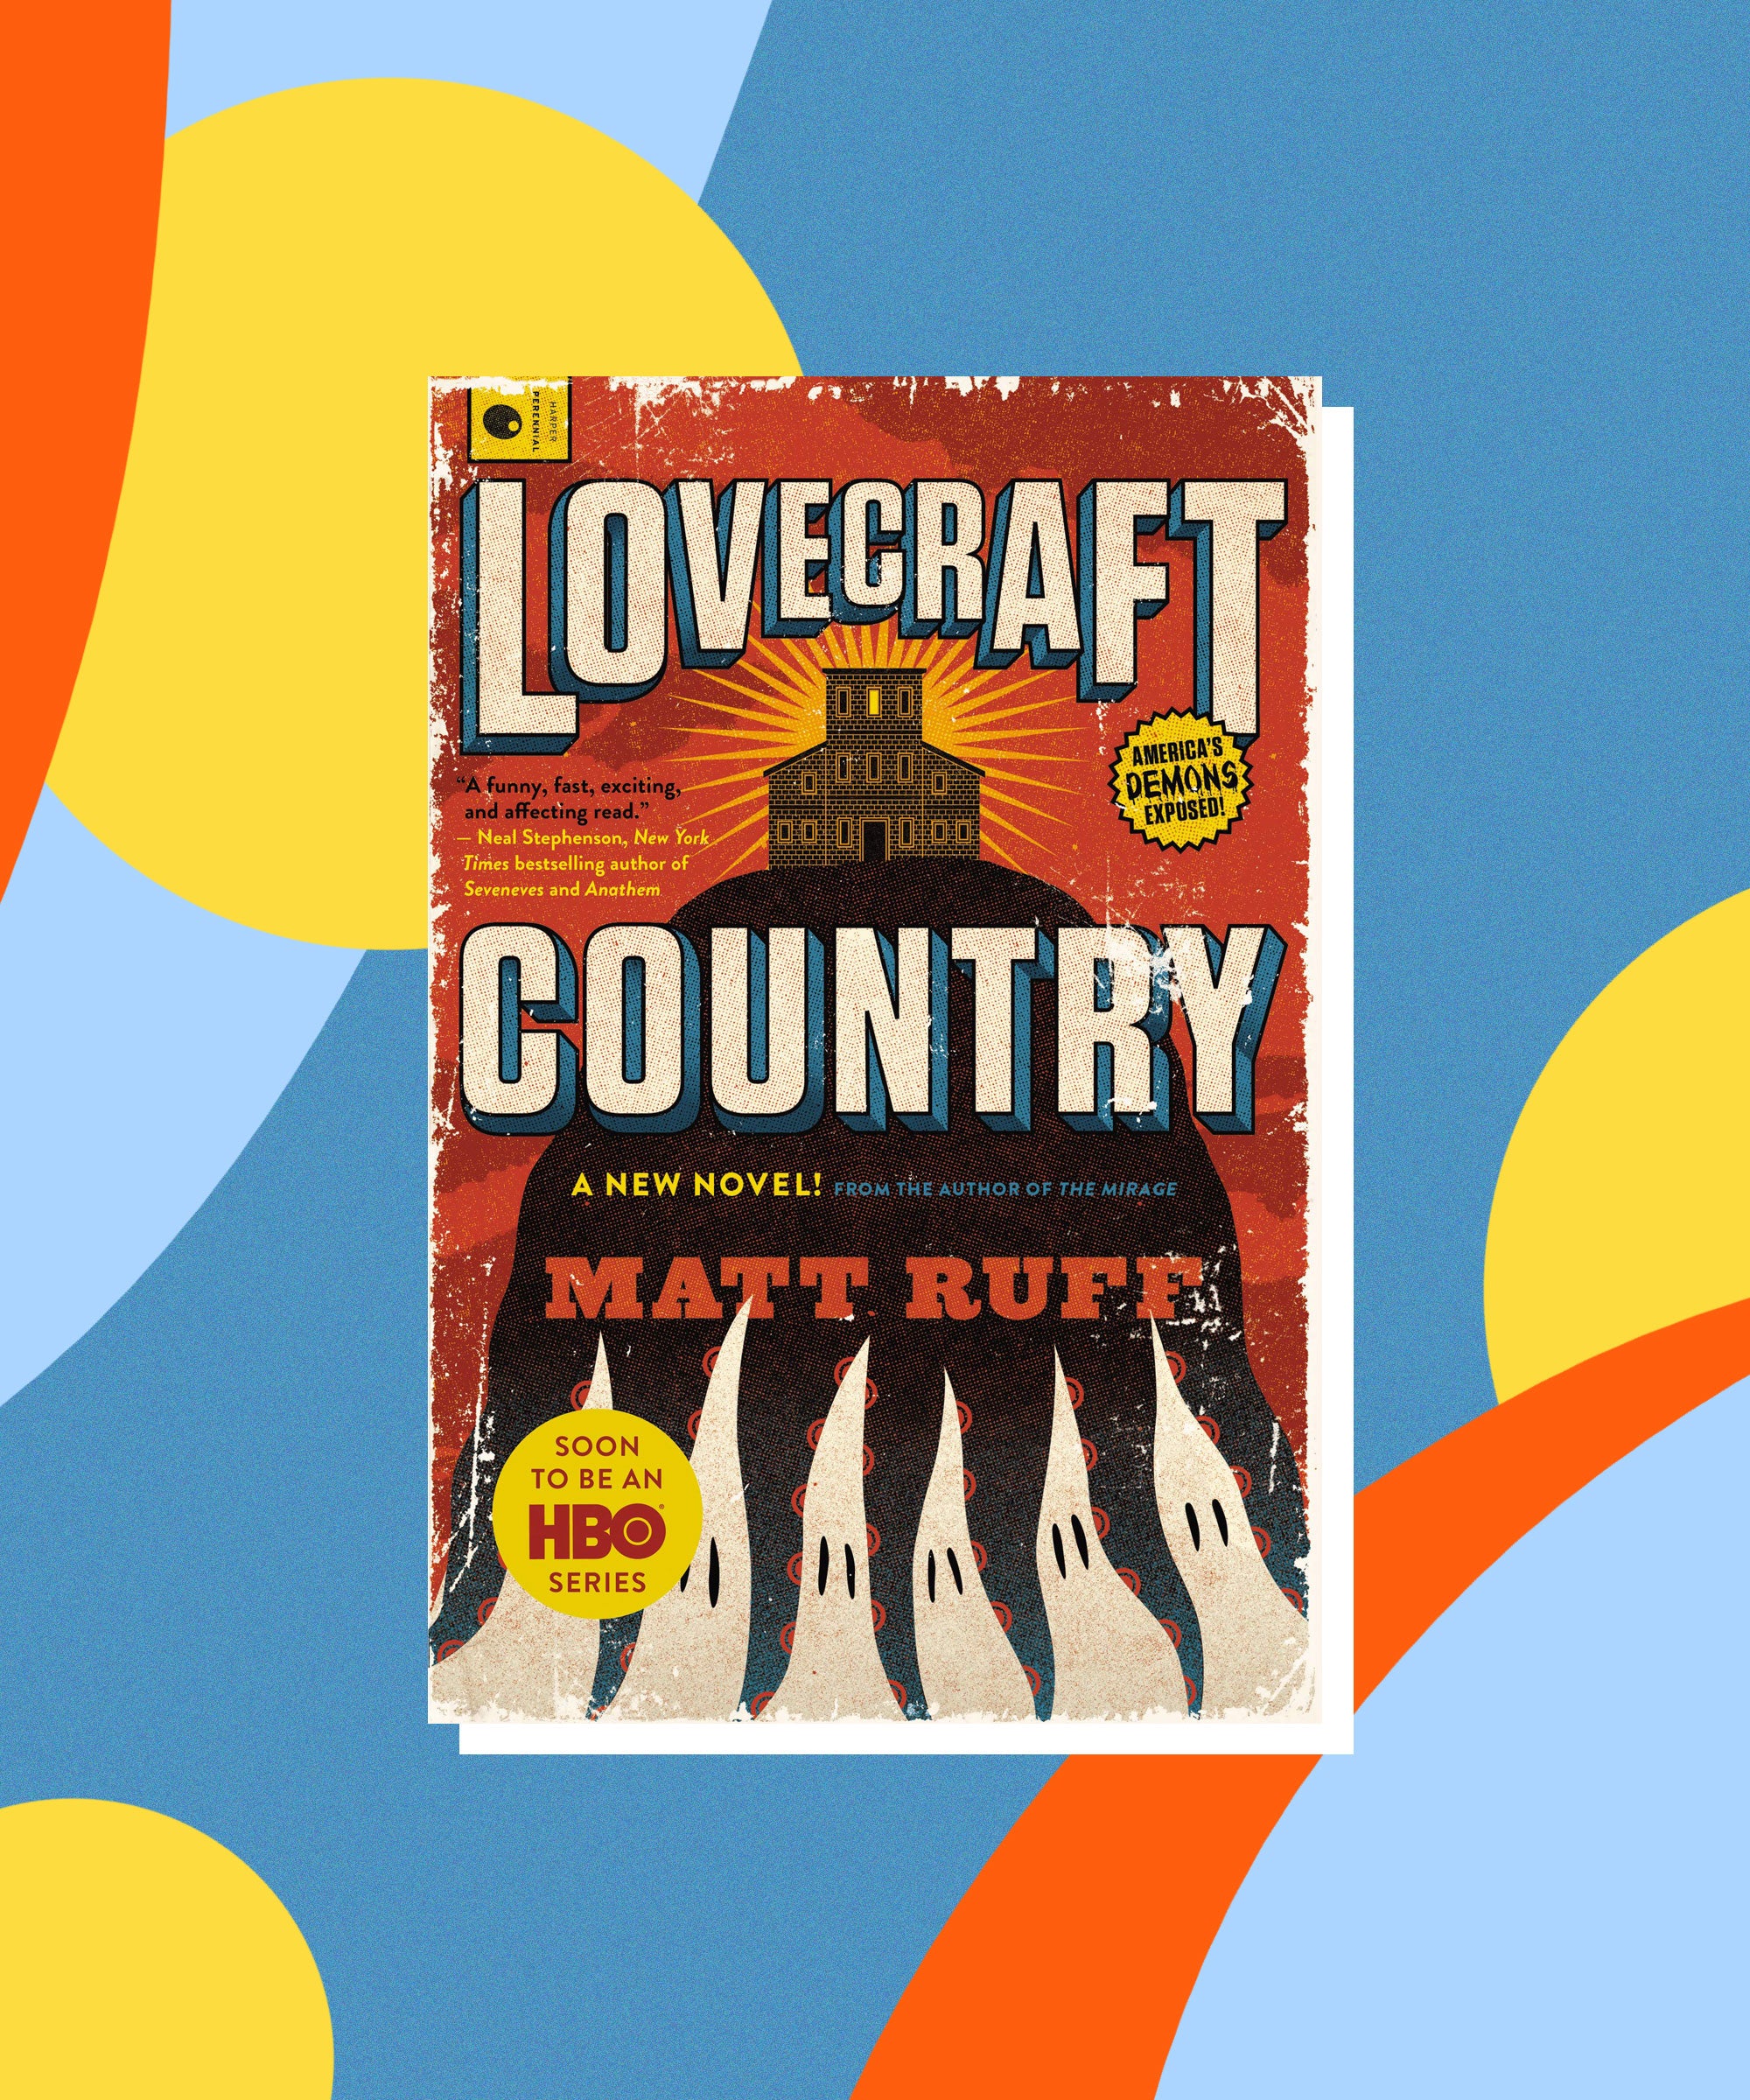 Meet the Monsters of Lovecraft Country